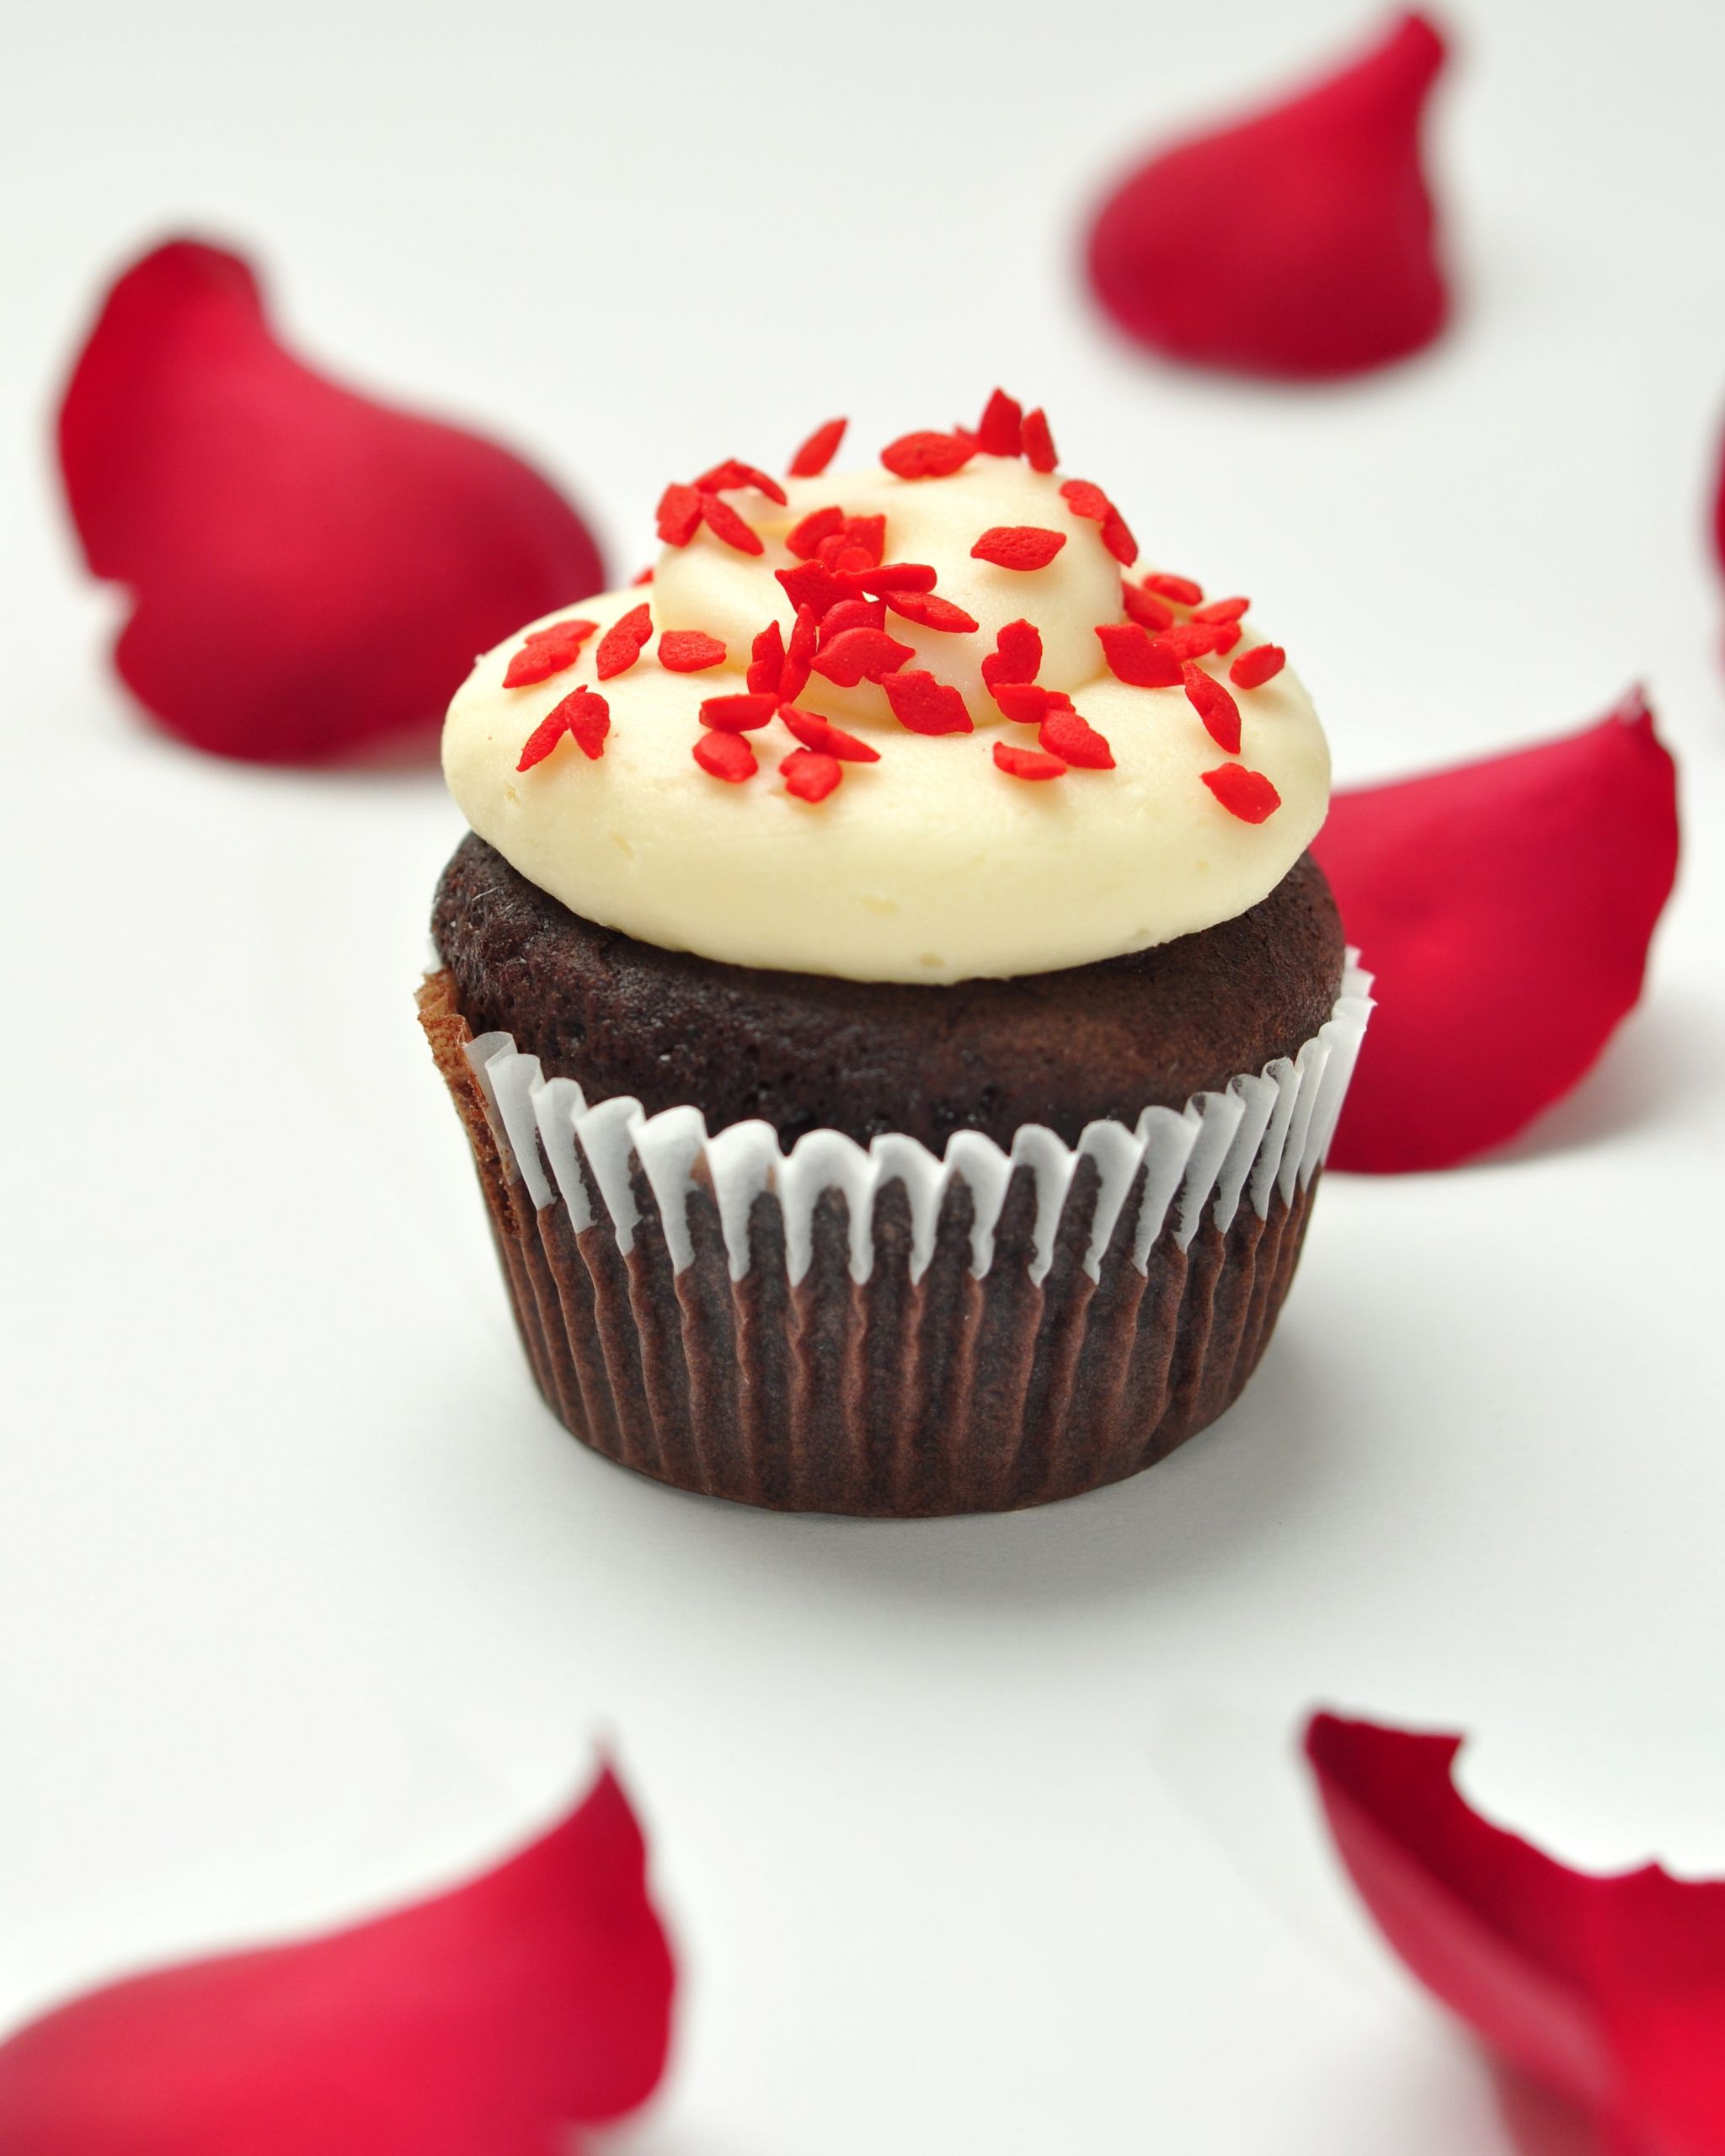 Valentines Day Cakes and Cupcakes Lovely Valentines Day Cakes Cupcakes Mumbai 1 Cakes and